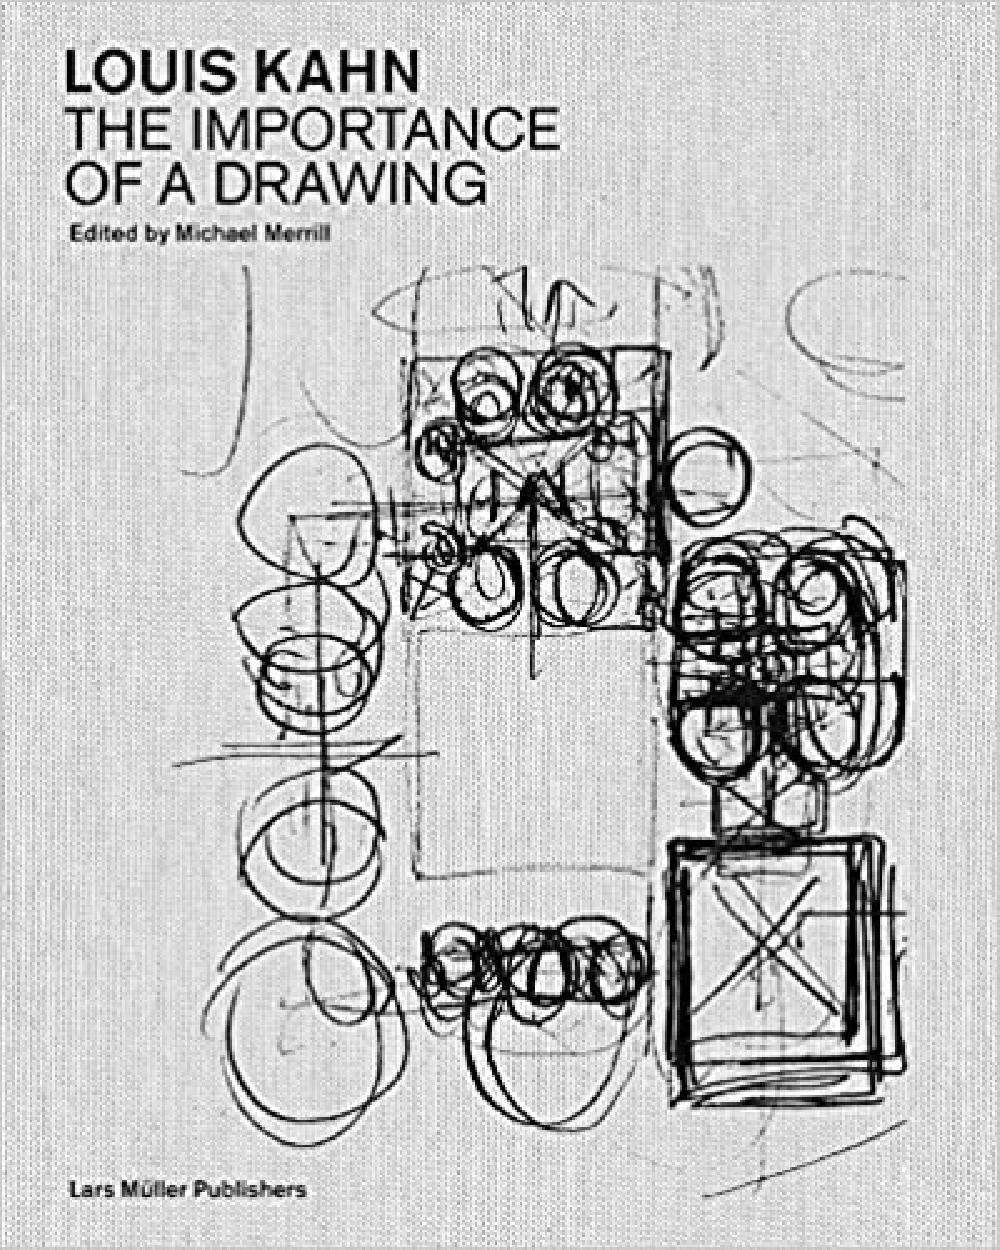 Louis Kahn: The importance of a drawing